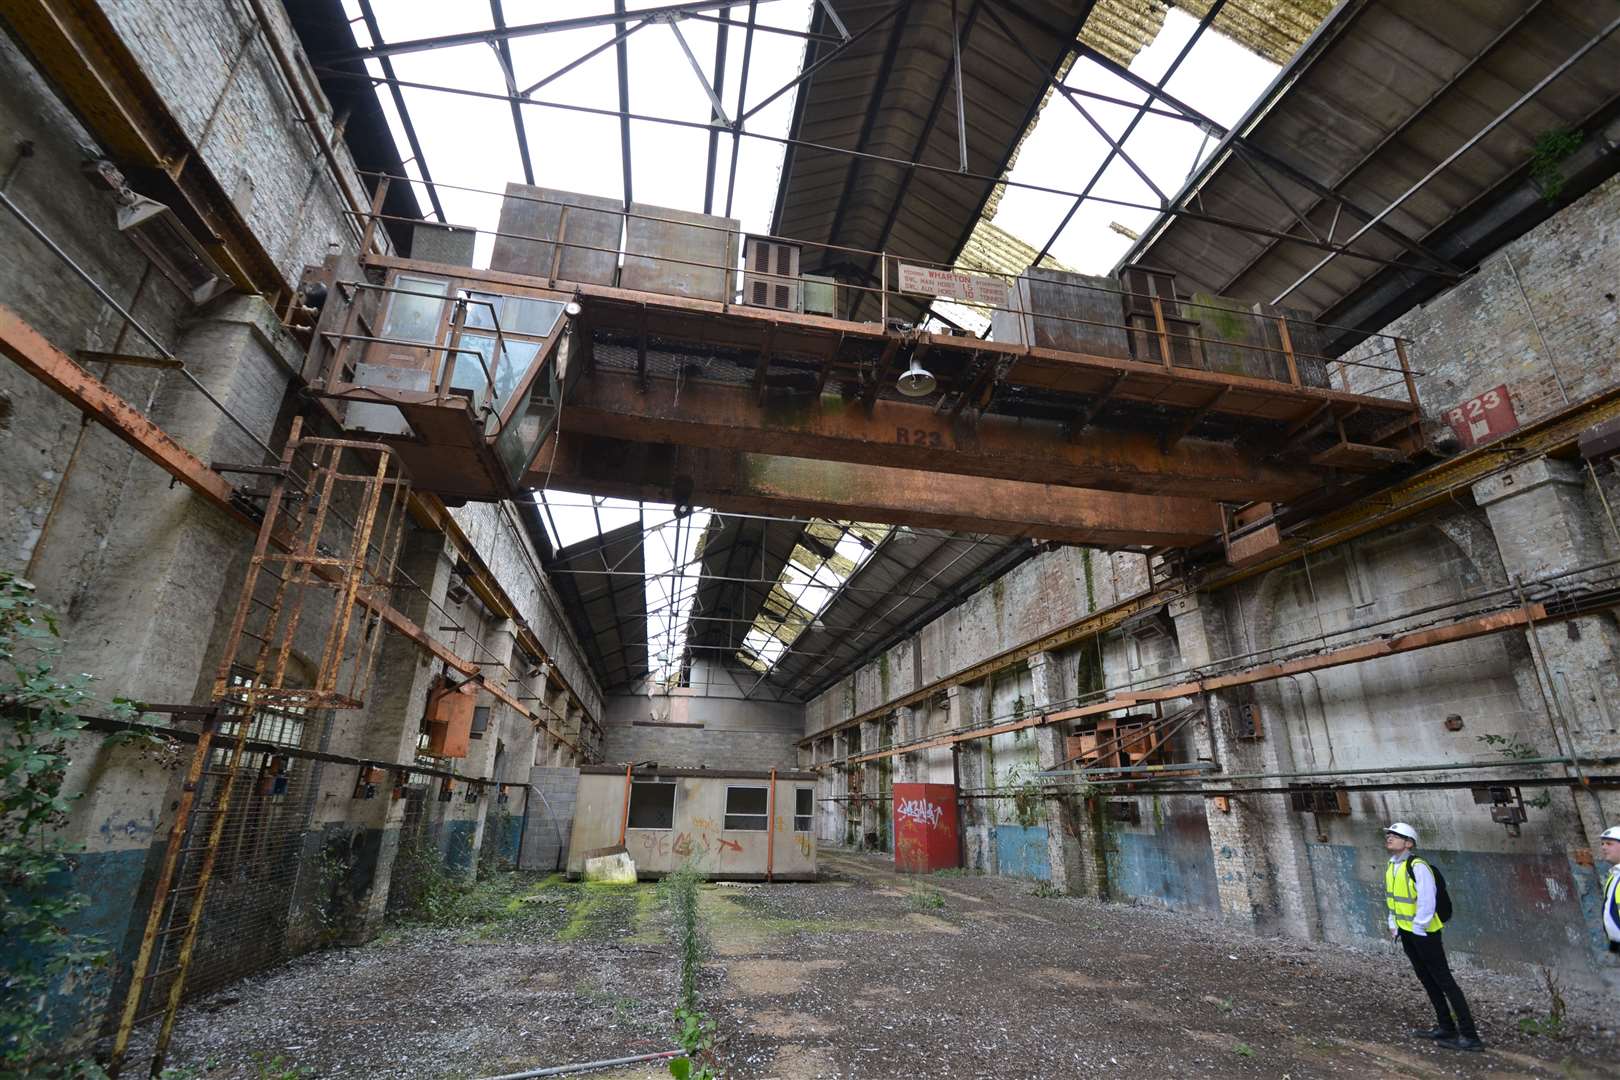 Inside the abandoned railway works. Picture: Steve Salter